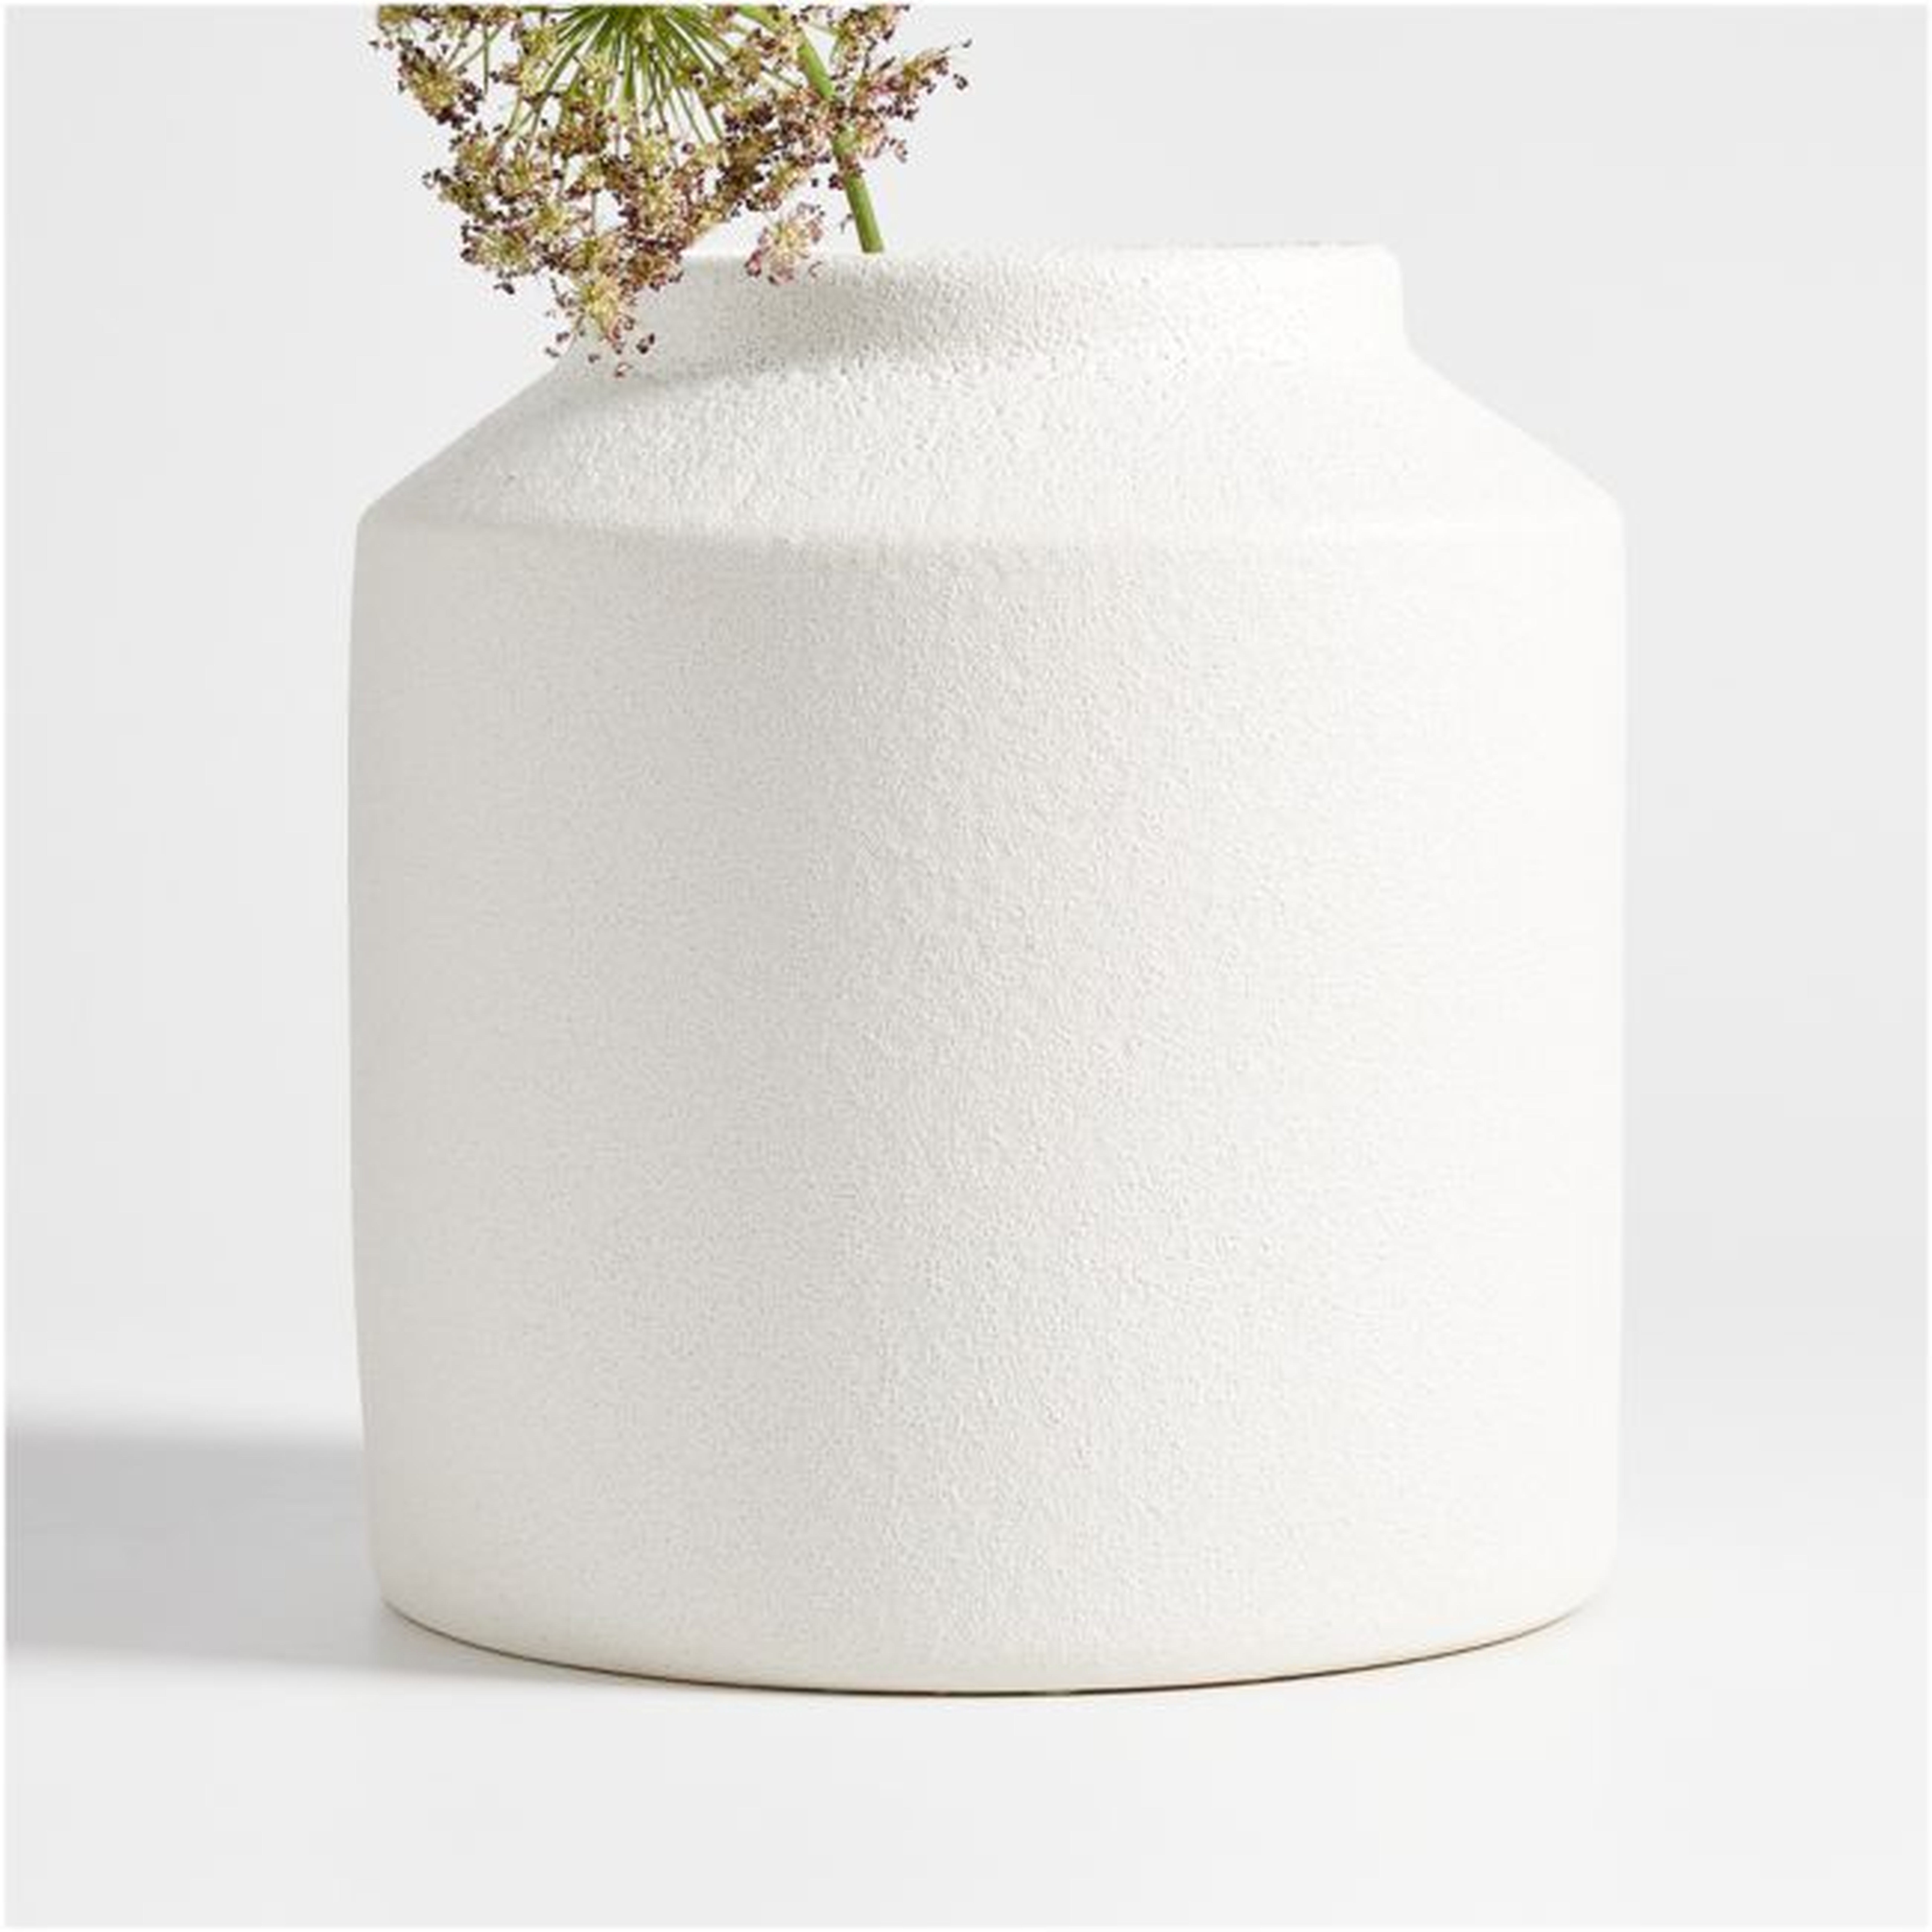 Manor Textured White Vase 11" - Crate and Barrel